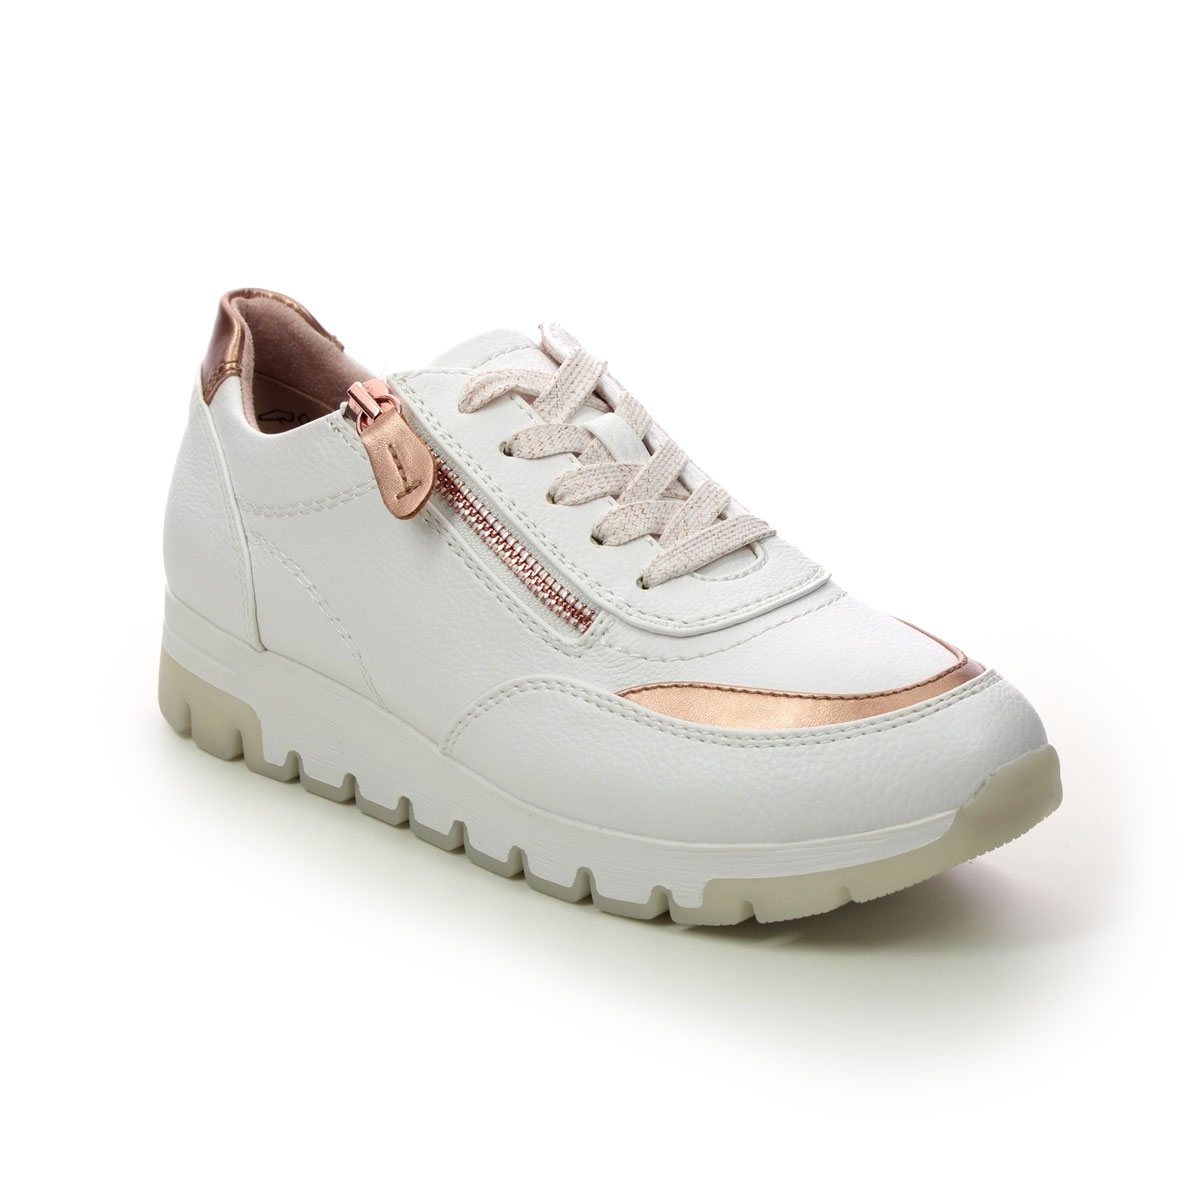 Jana Flying Wide Zip 23768-20-152 White Rose gold trainers